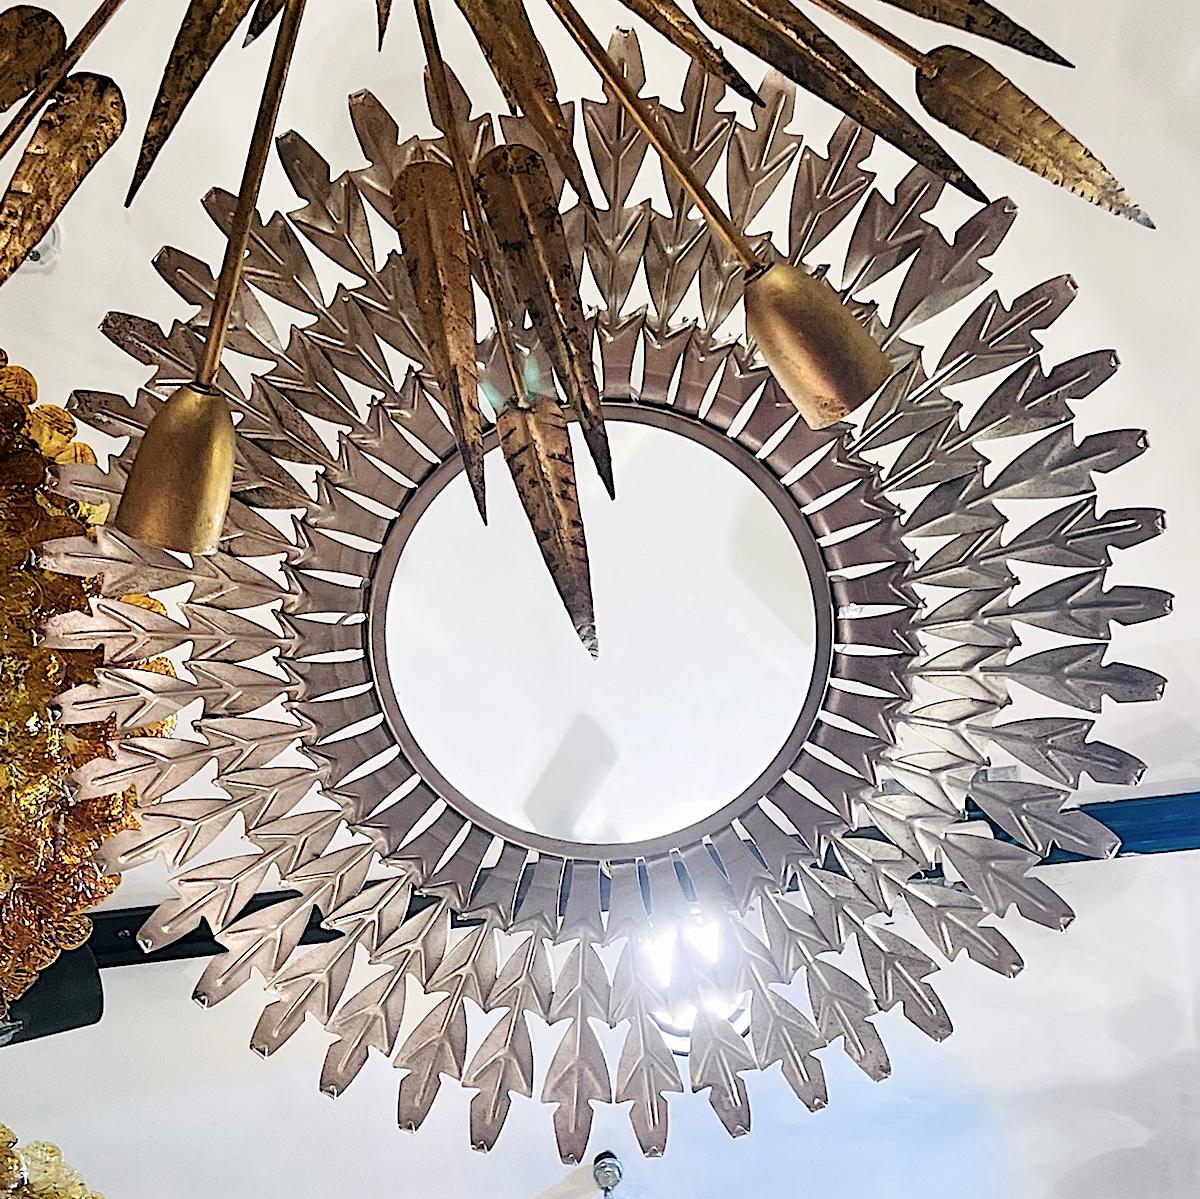 A circa 1950's silver plated sunburst shaped light fixture with 4 interior lights.

Measurements:
Drop: 11